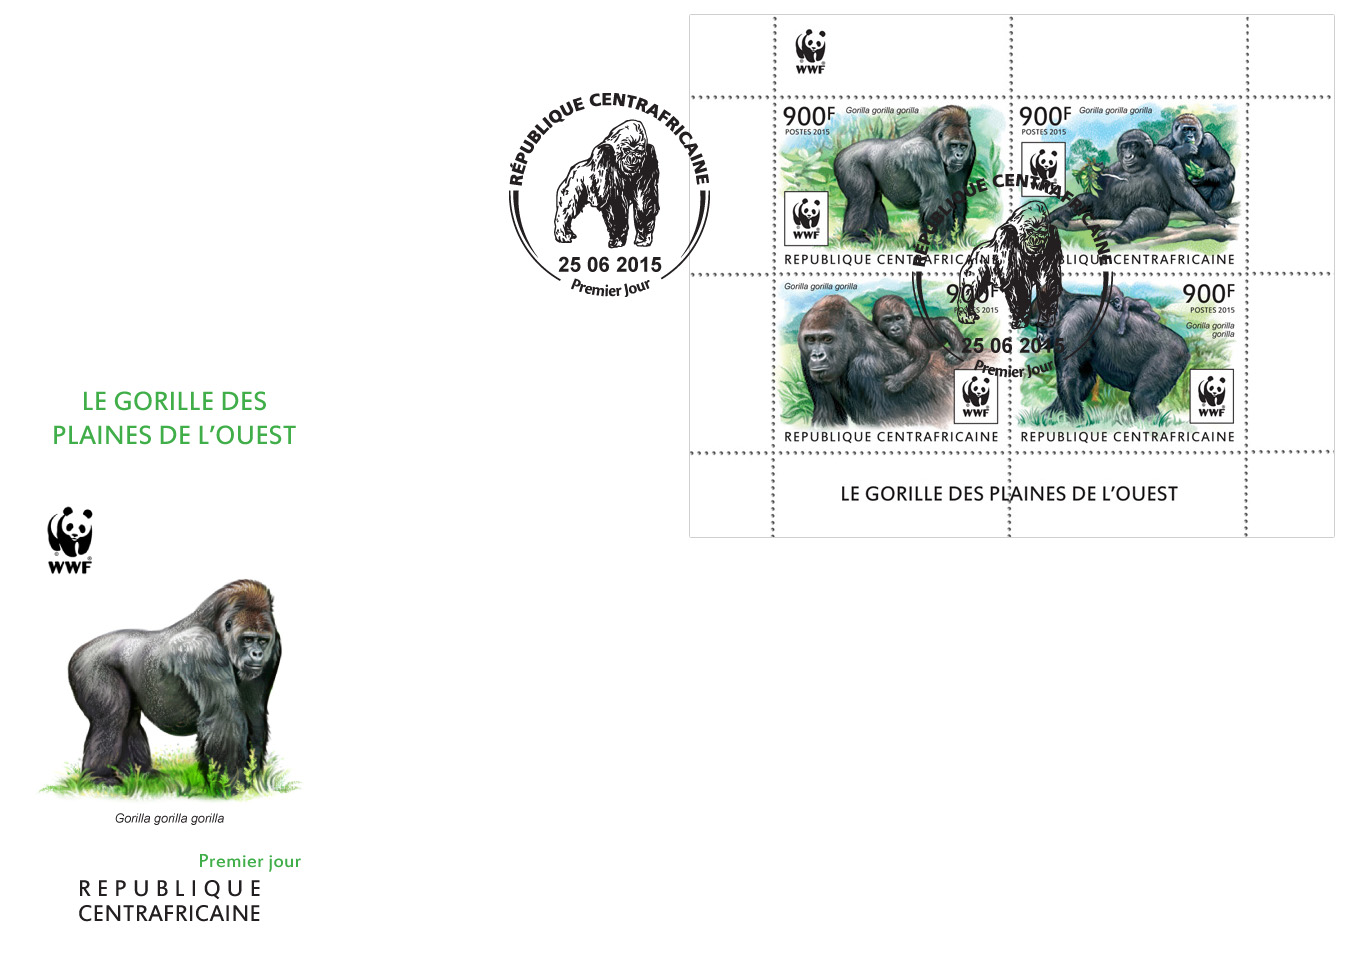 WWF – Gorilla (FDC) - Issue of Central African republic postage stamps